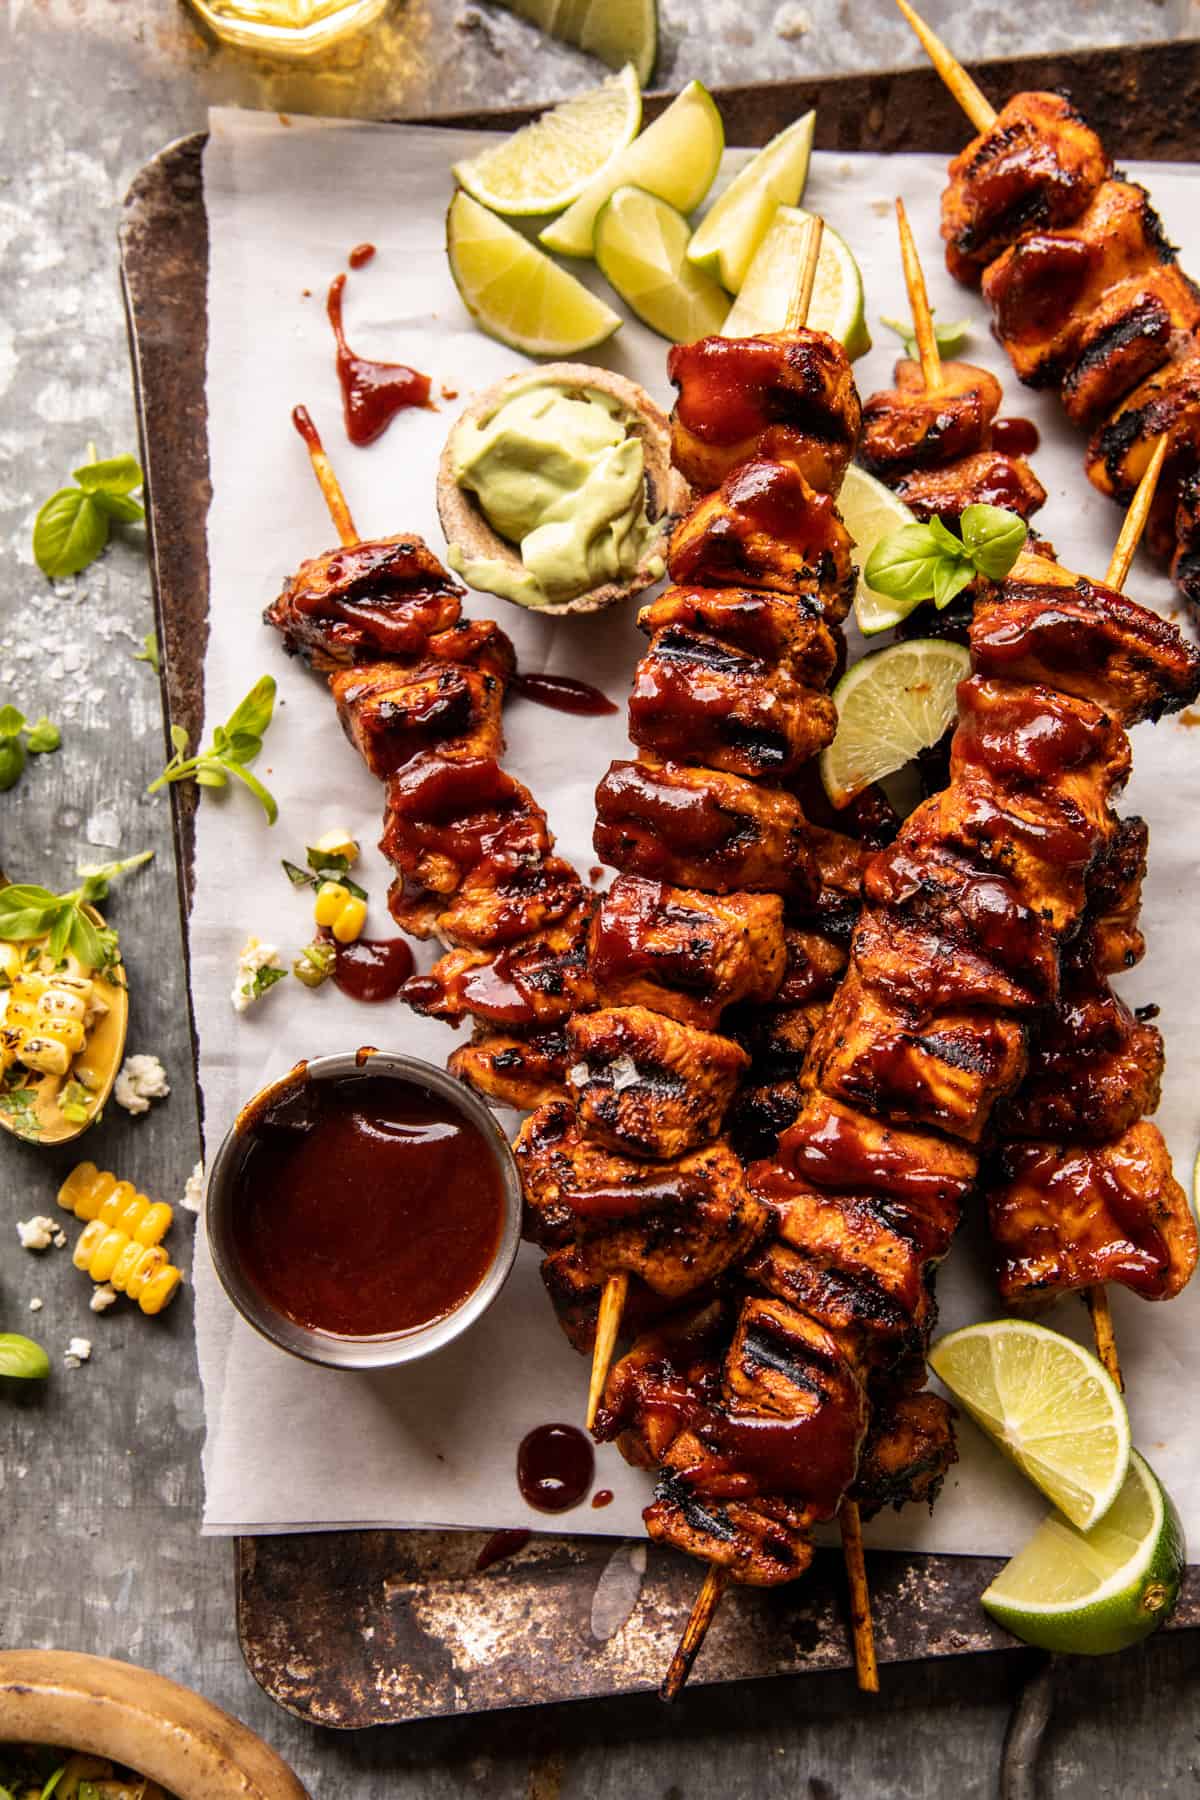 Barbecue Chicken and Bacon Skewers, Poultry Recipes